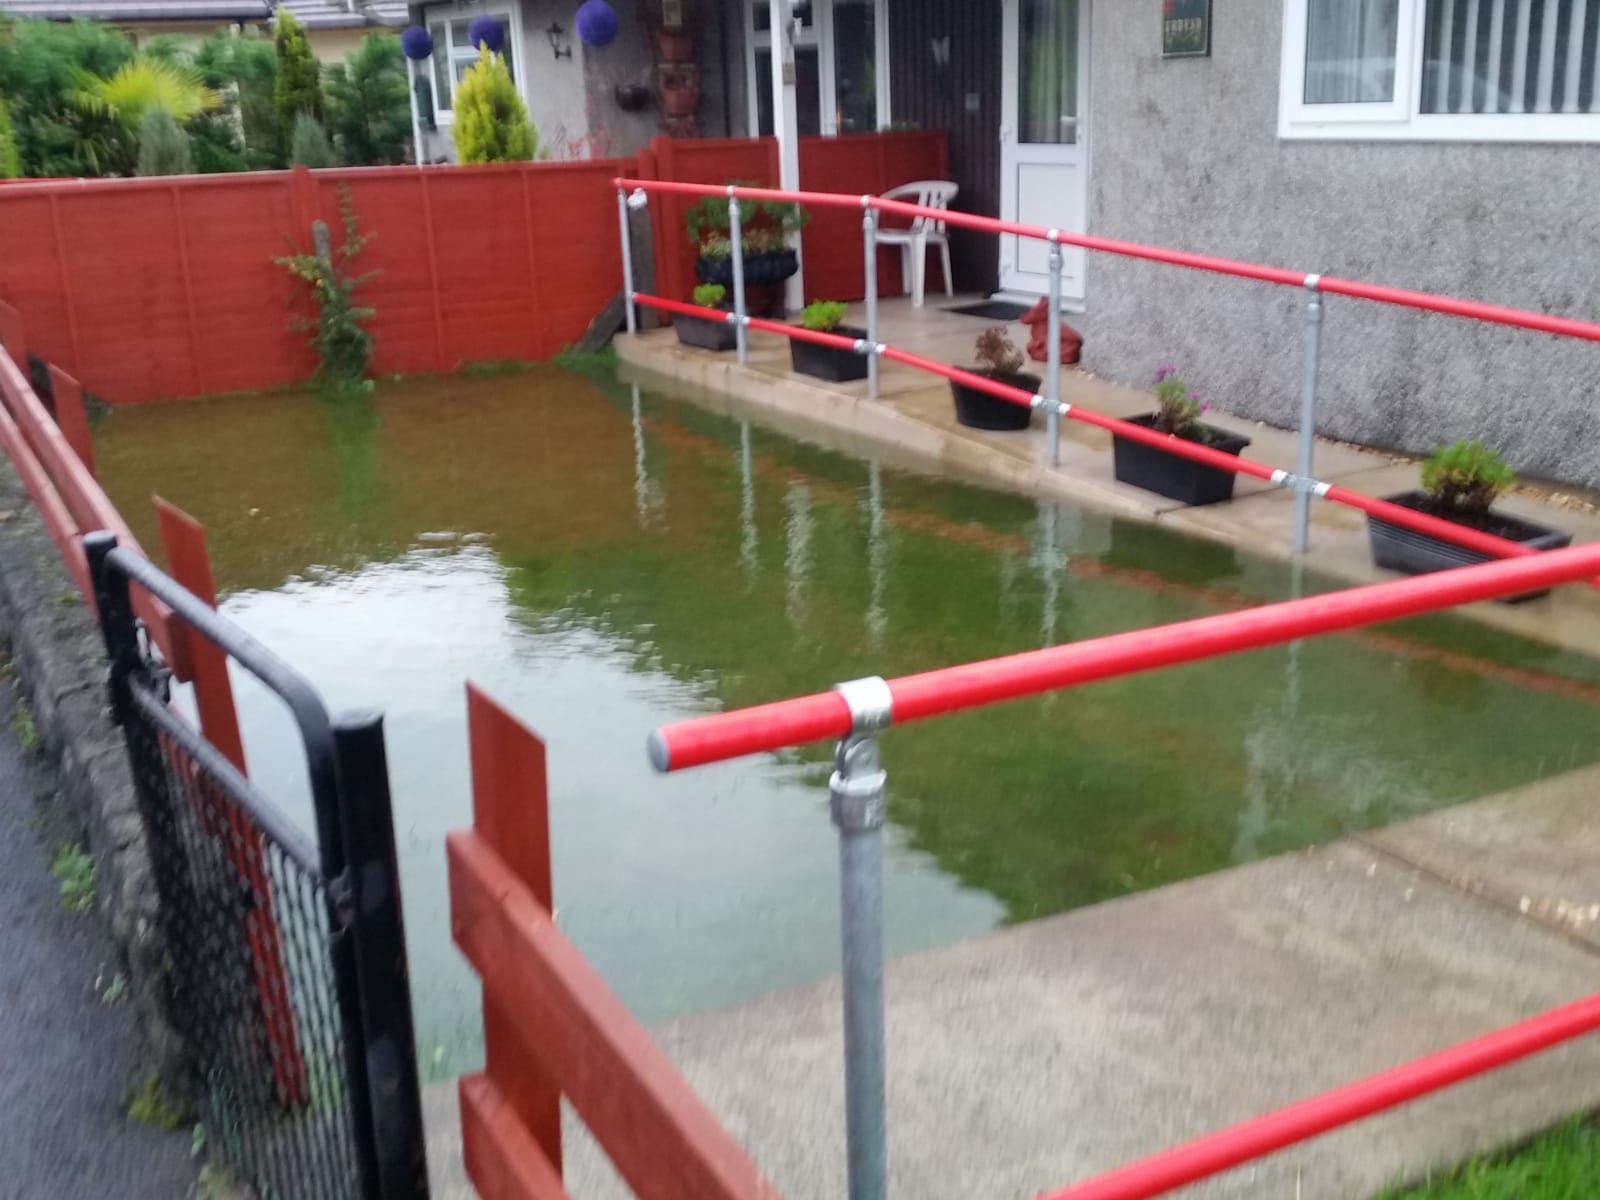 A NEW ‘UNWANTED’ SWIMMING POOL IN SWANSEA